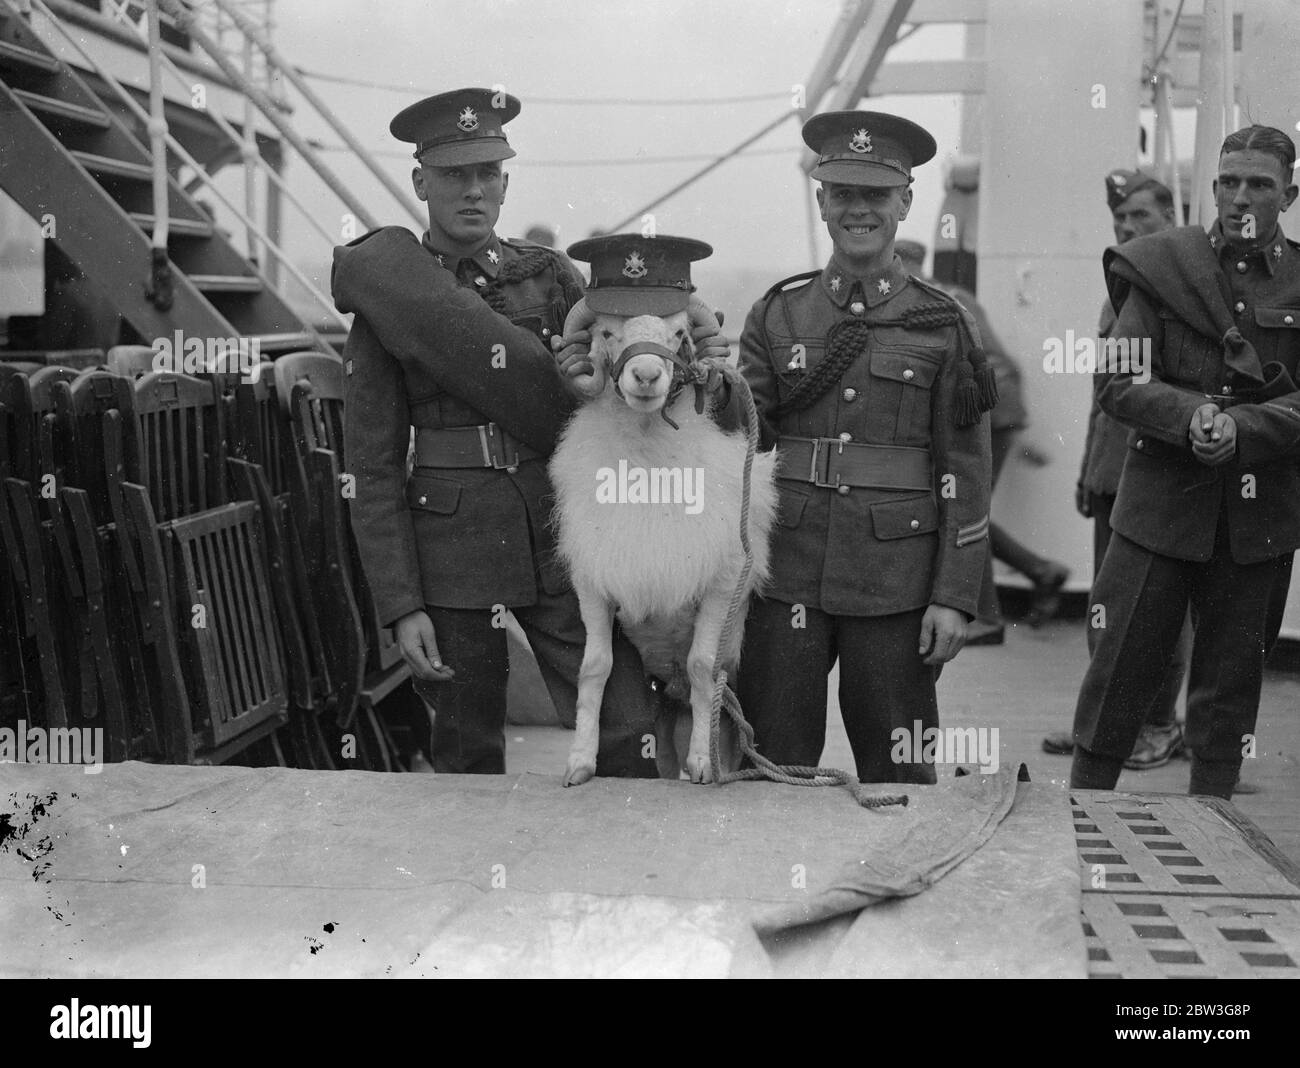 Sherwood Foresters home , with their goat ! . Bringing with them their goat mascot , Derby XV , Sherwood Foresters arrived at Southampton on the troopship Cameronia after service aboard . Photo shows , Sherwood Foresters cheering their mascot at Southampton . 8 April 1936 Stock Photo